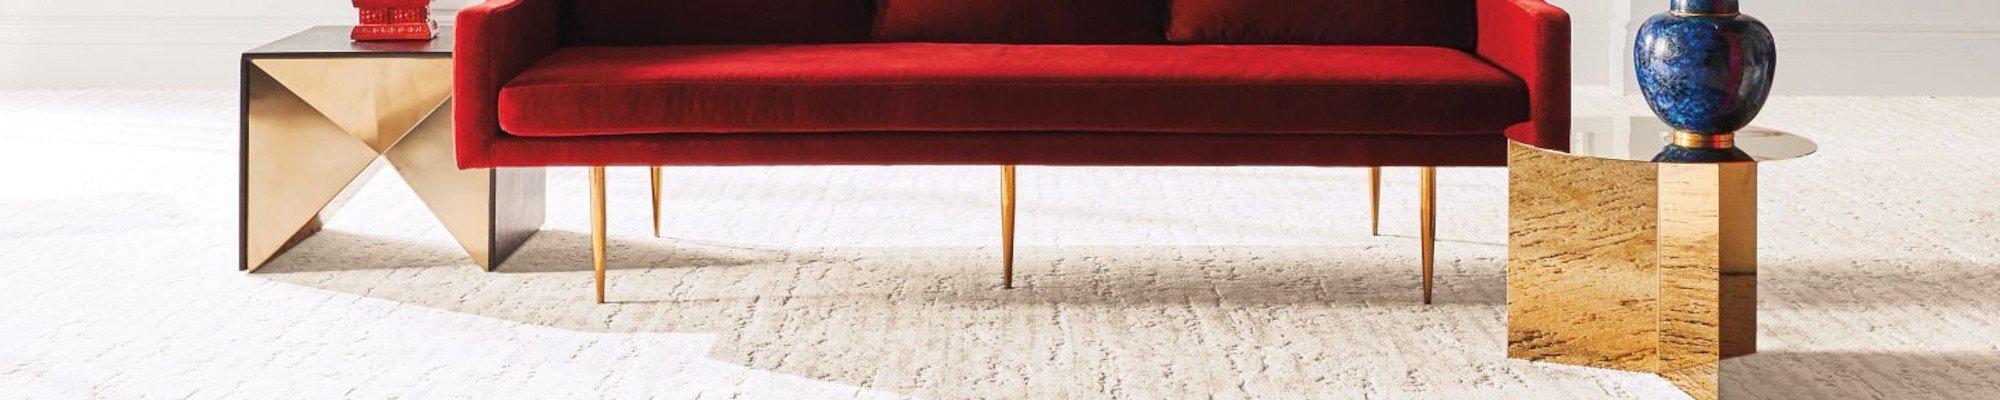 red couch on white carpet